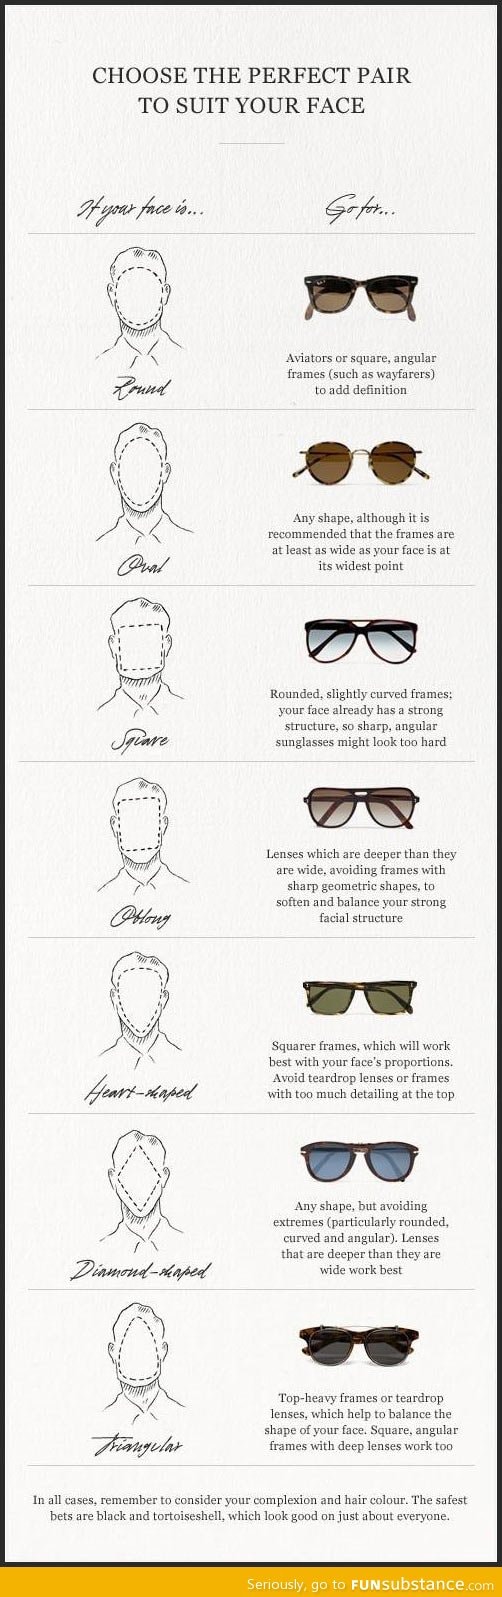 Finding the perfect shades to suit your face